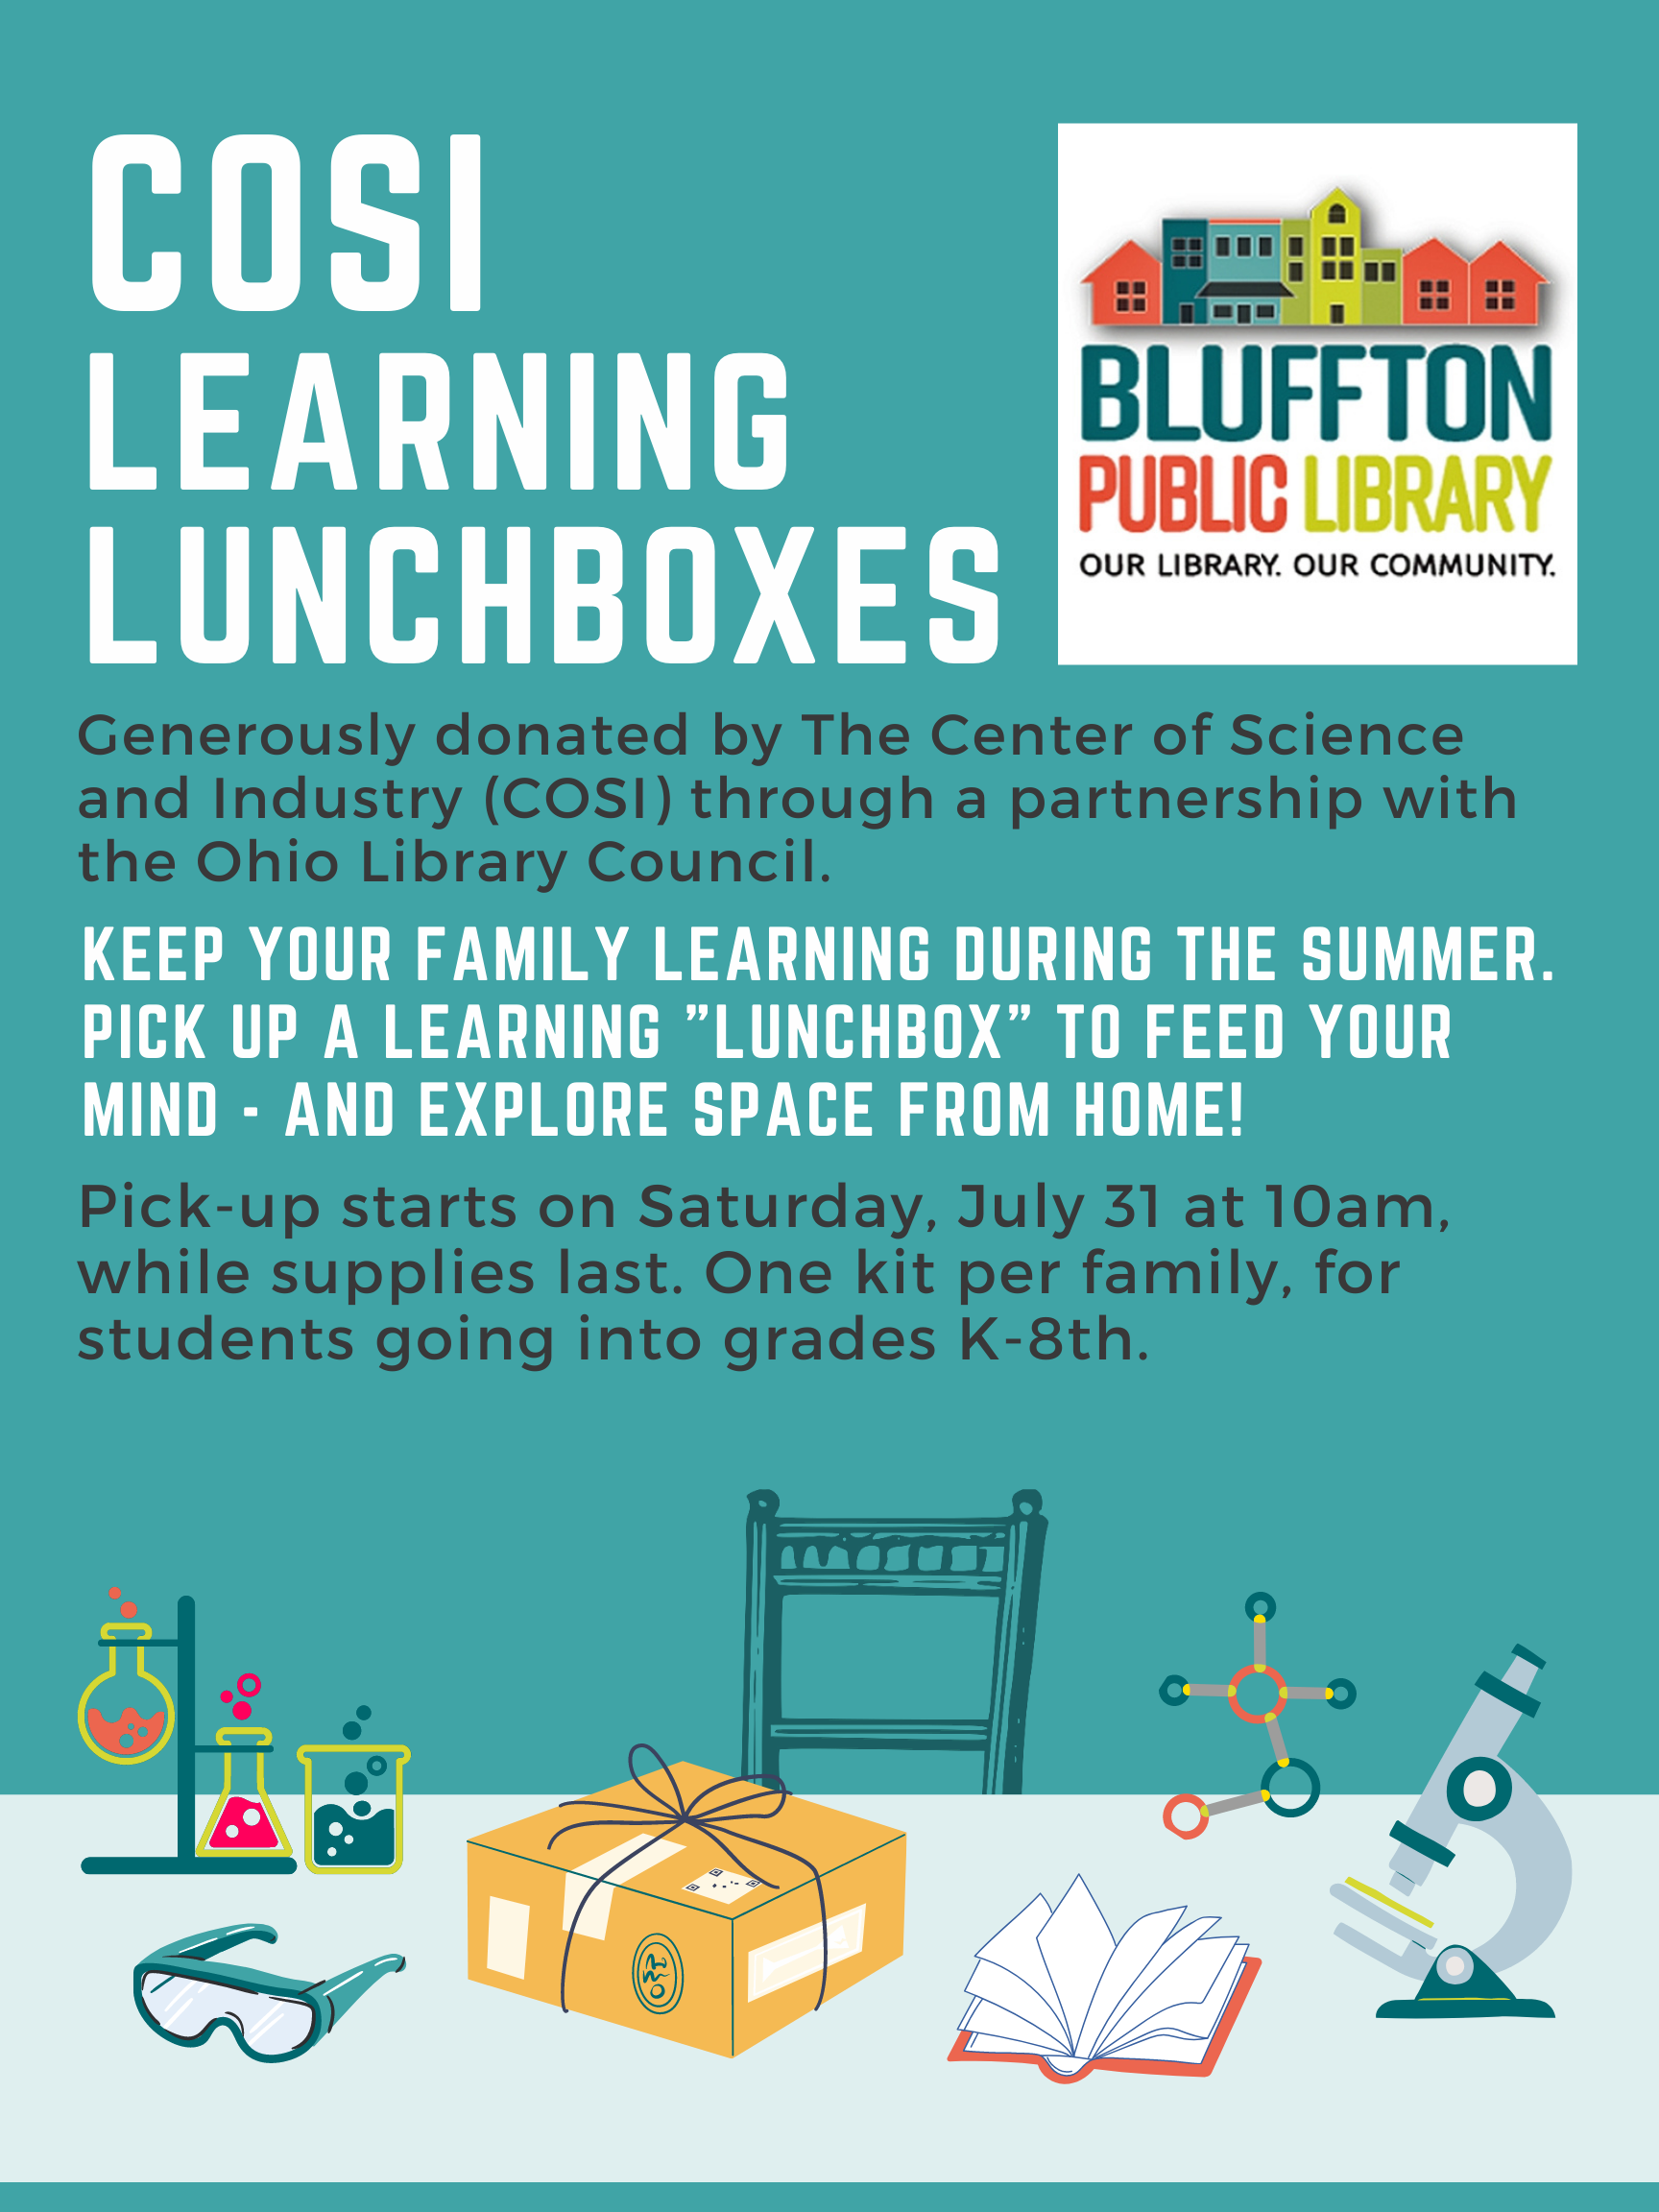 COSI Learning Lunchboxes flyer with a table graphic with a large yellow box and science related accessories